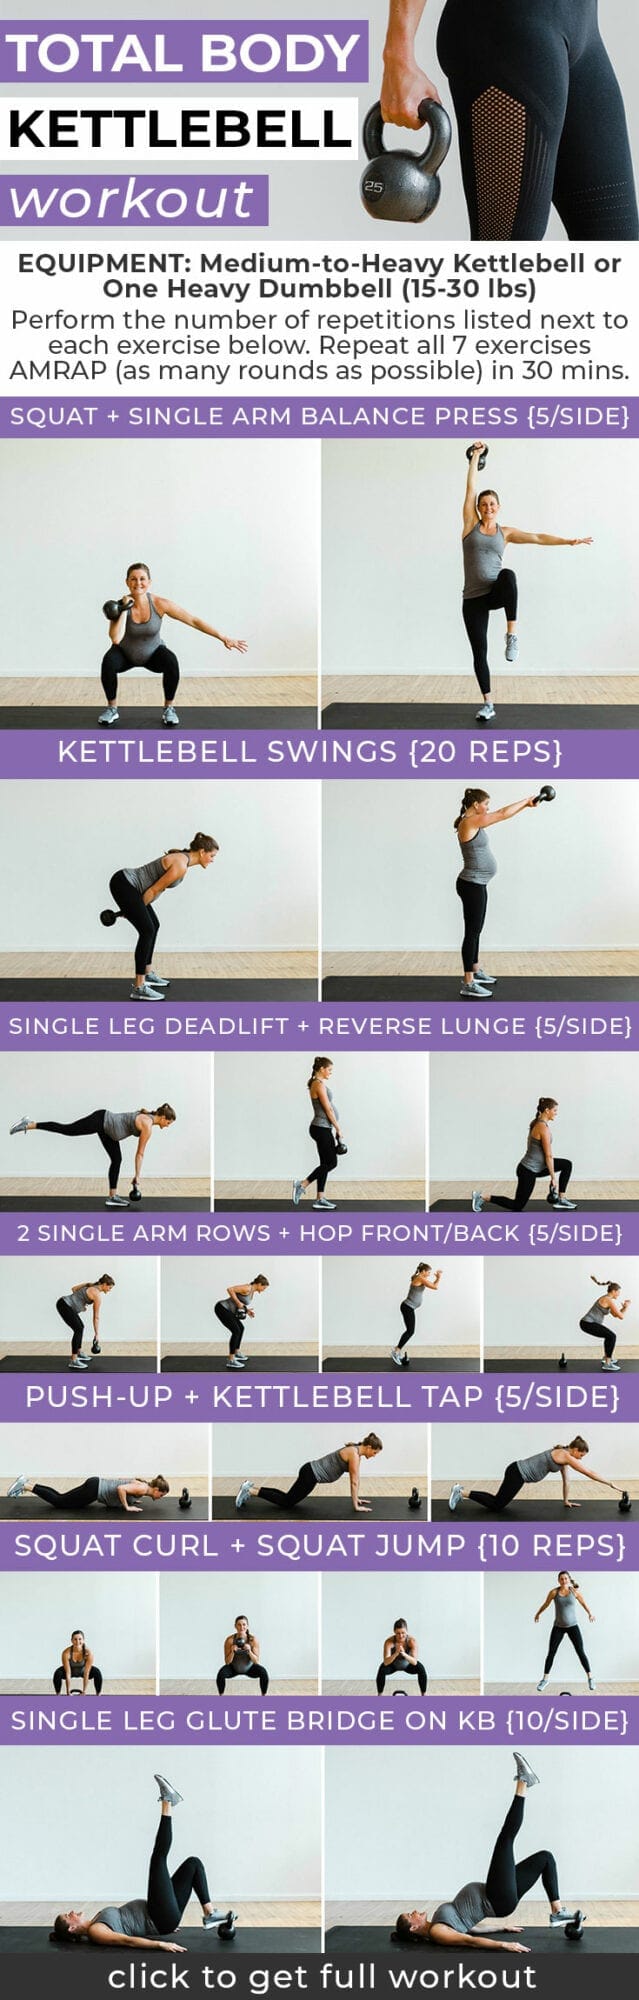  22 Minute Kettlebell Workout for Build Muscle